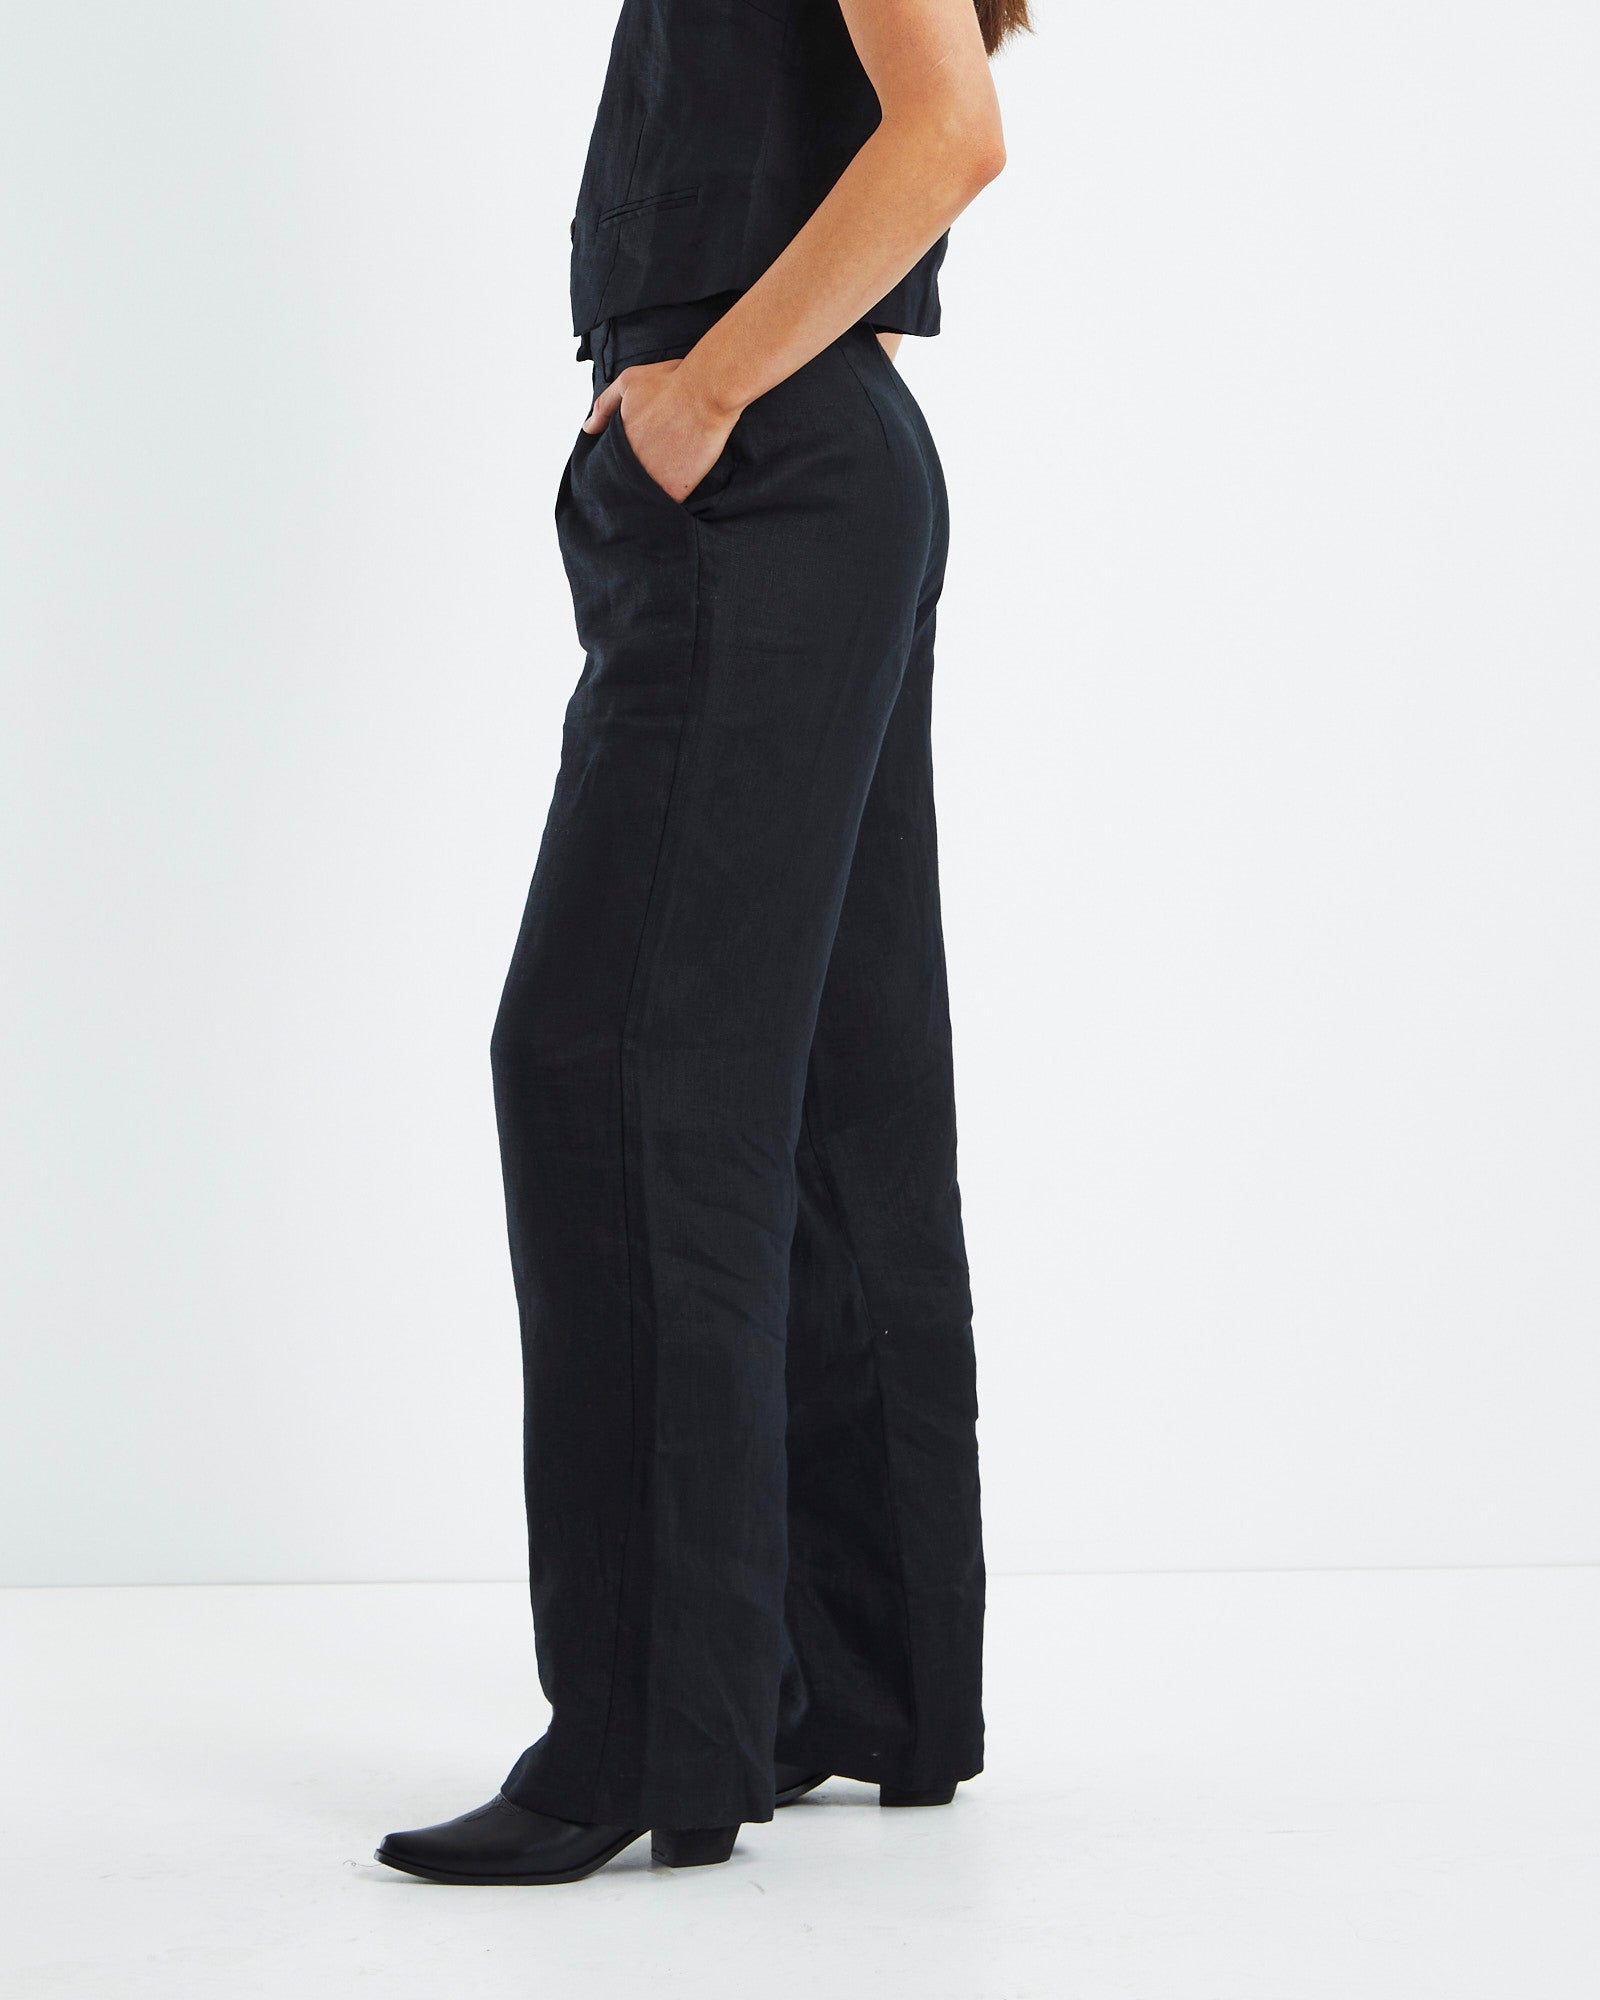 Lights Of All Slouch Pant - Black | Garmentory